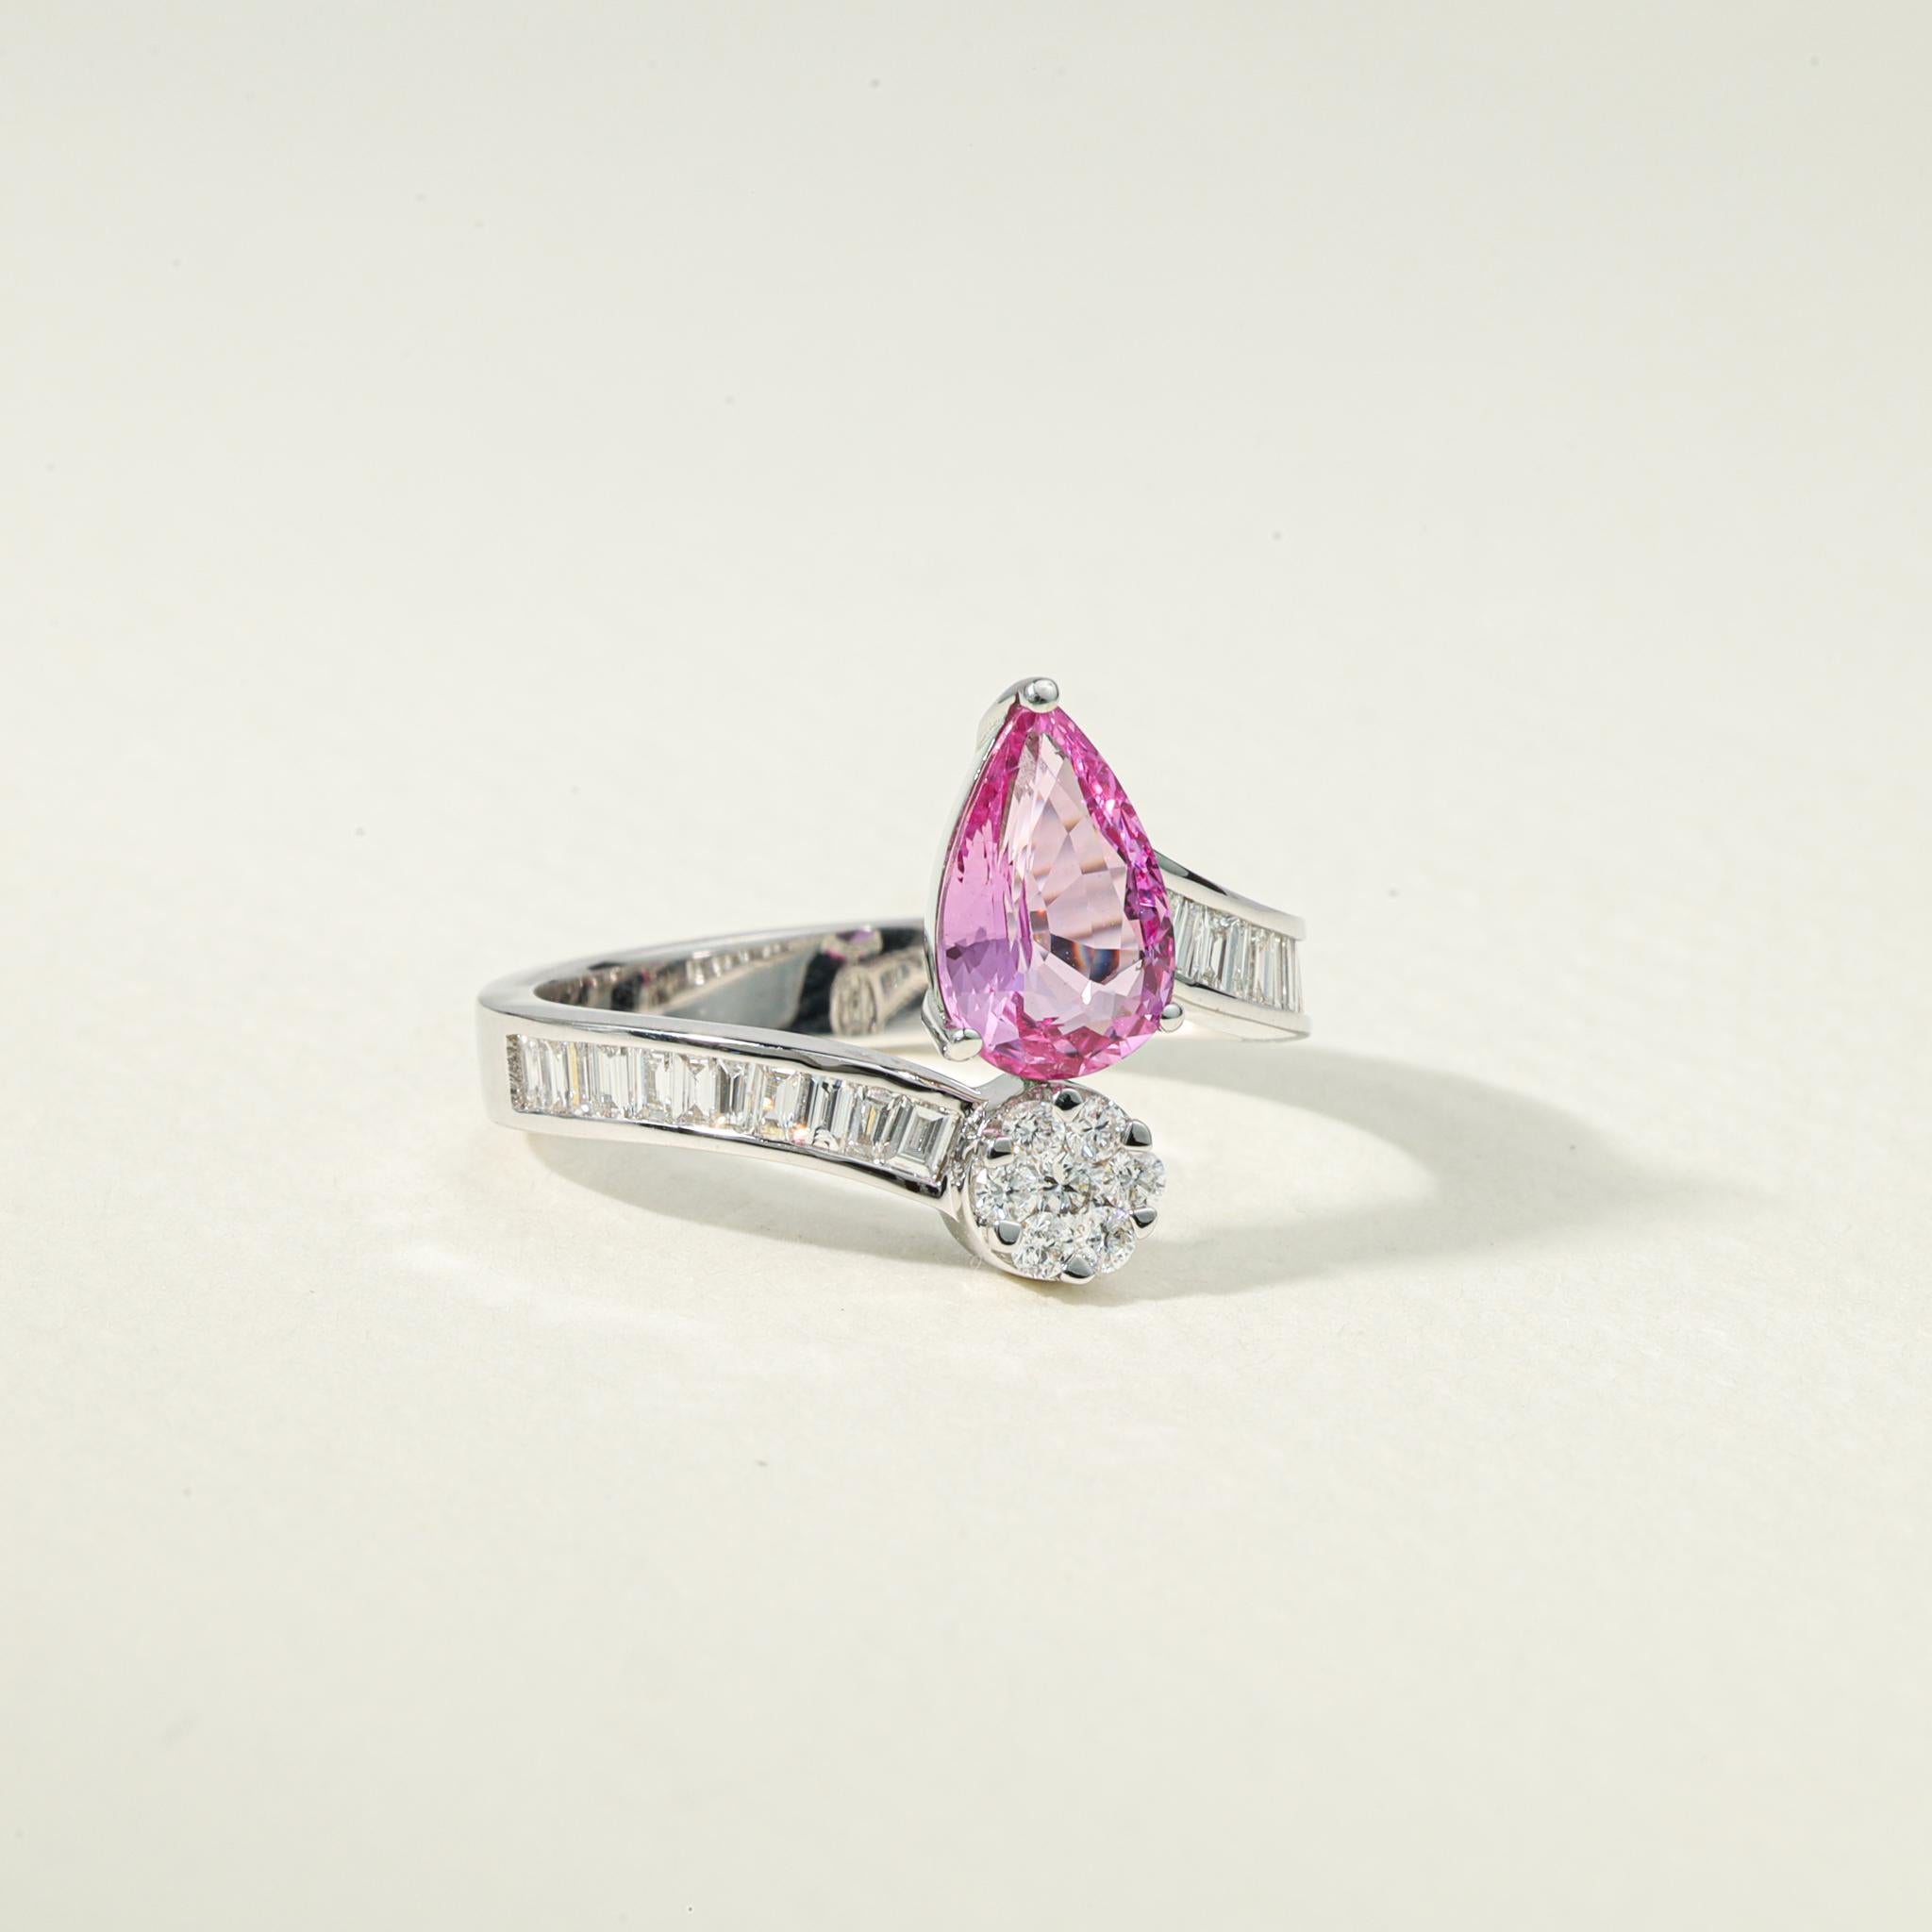 Art Deco 1.5 Carat Pear Pink Sapphire Diamond Cocktail Engagement Ring in 18k White Gold For Sale